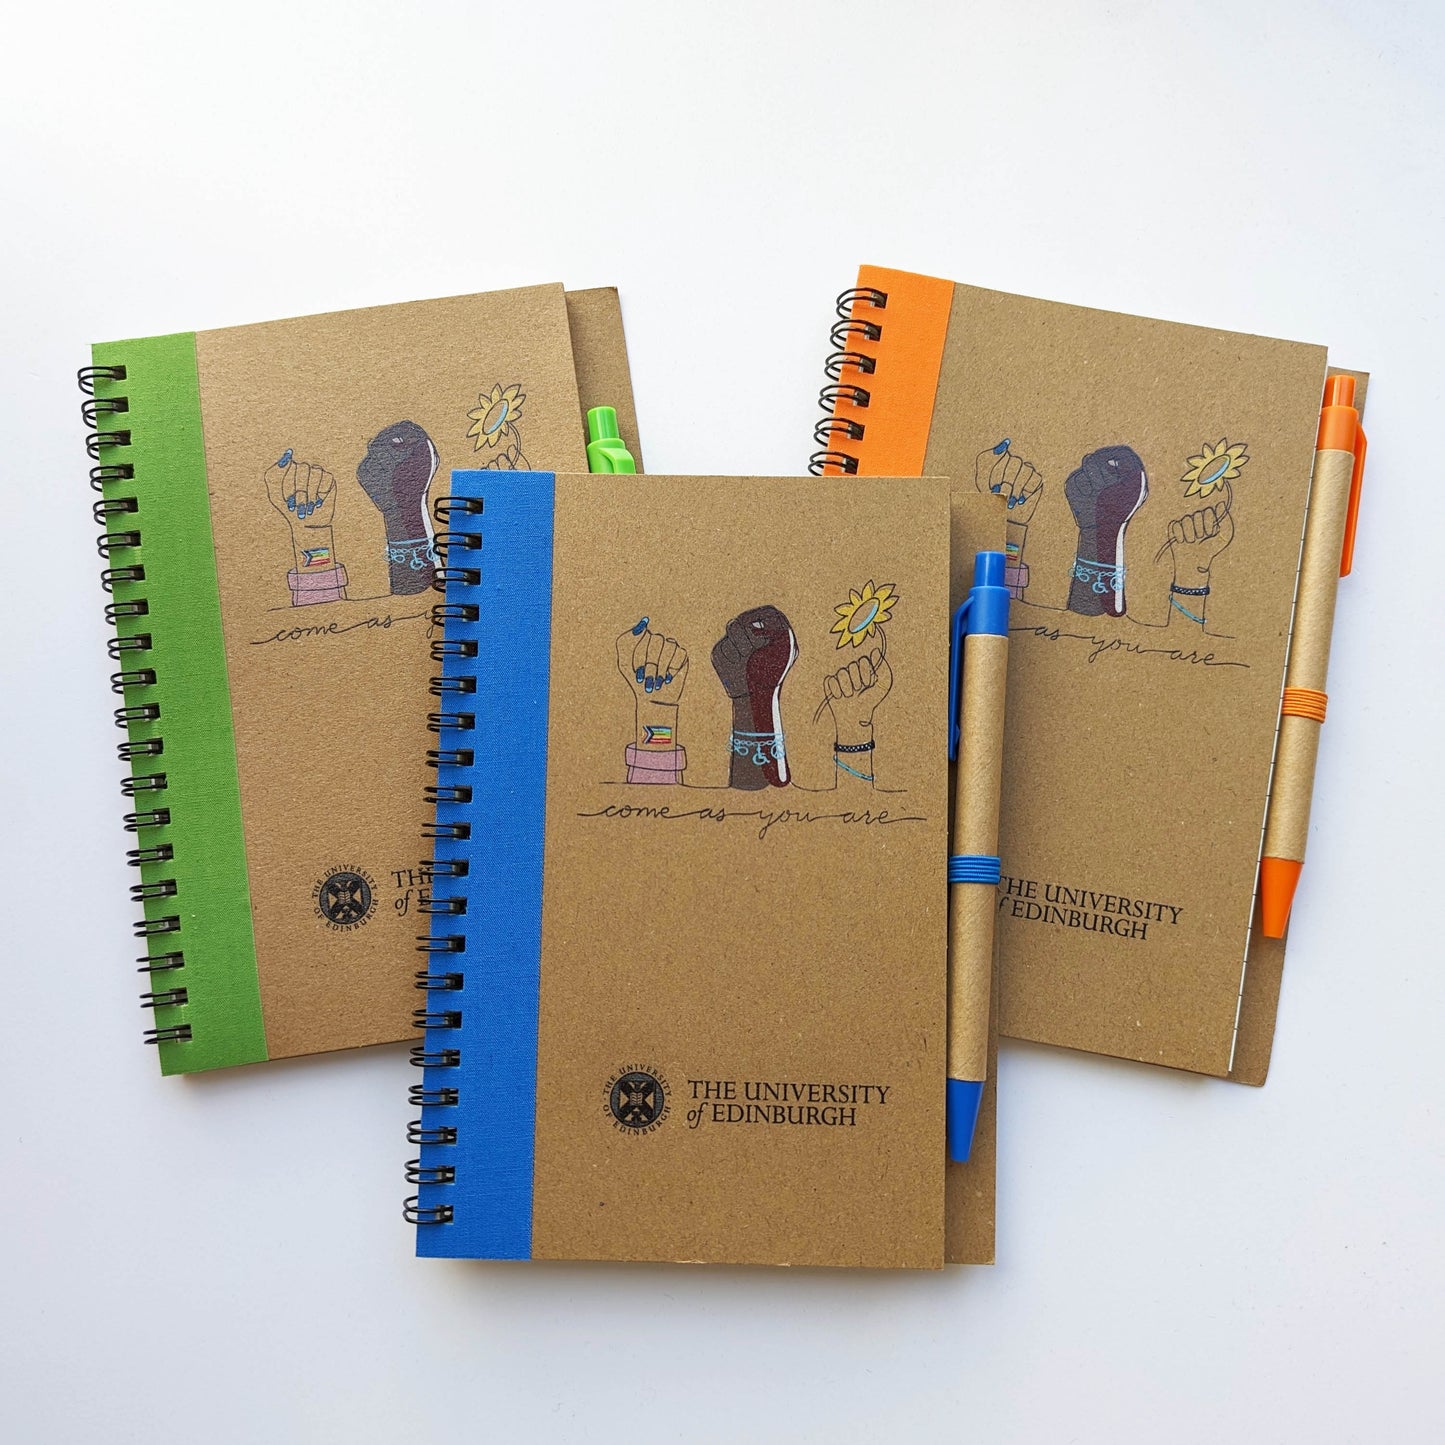 Come as You Are Notebooks with pens - available in three colour bands: blue, green and orange. Design on front are three different hands representing the staff networks diversity: race, gender, sexuality and disability.